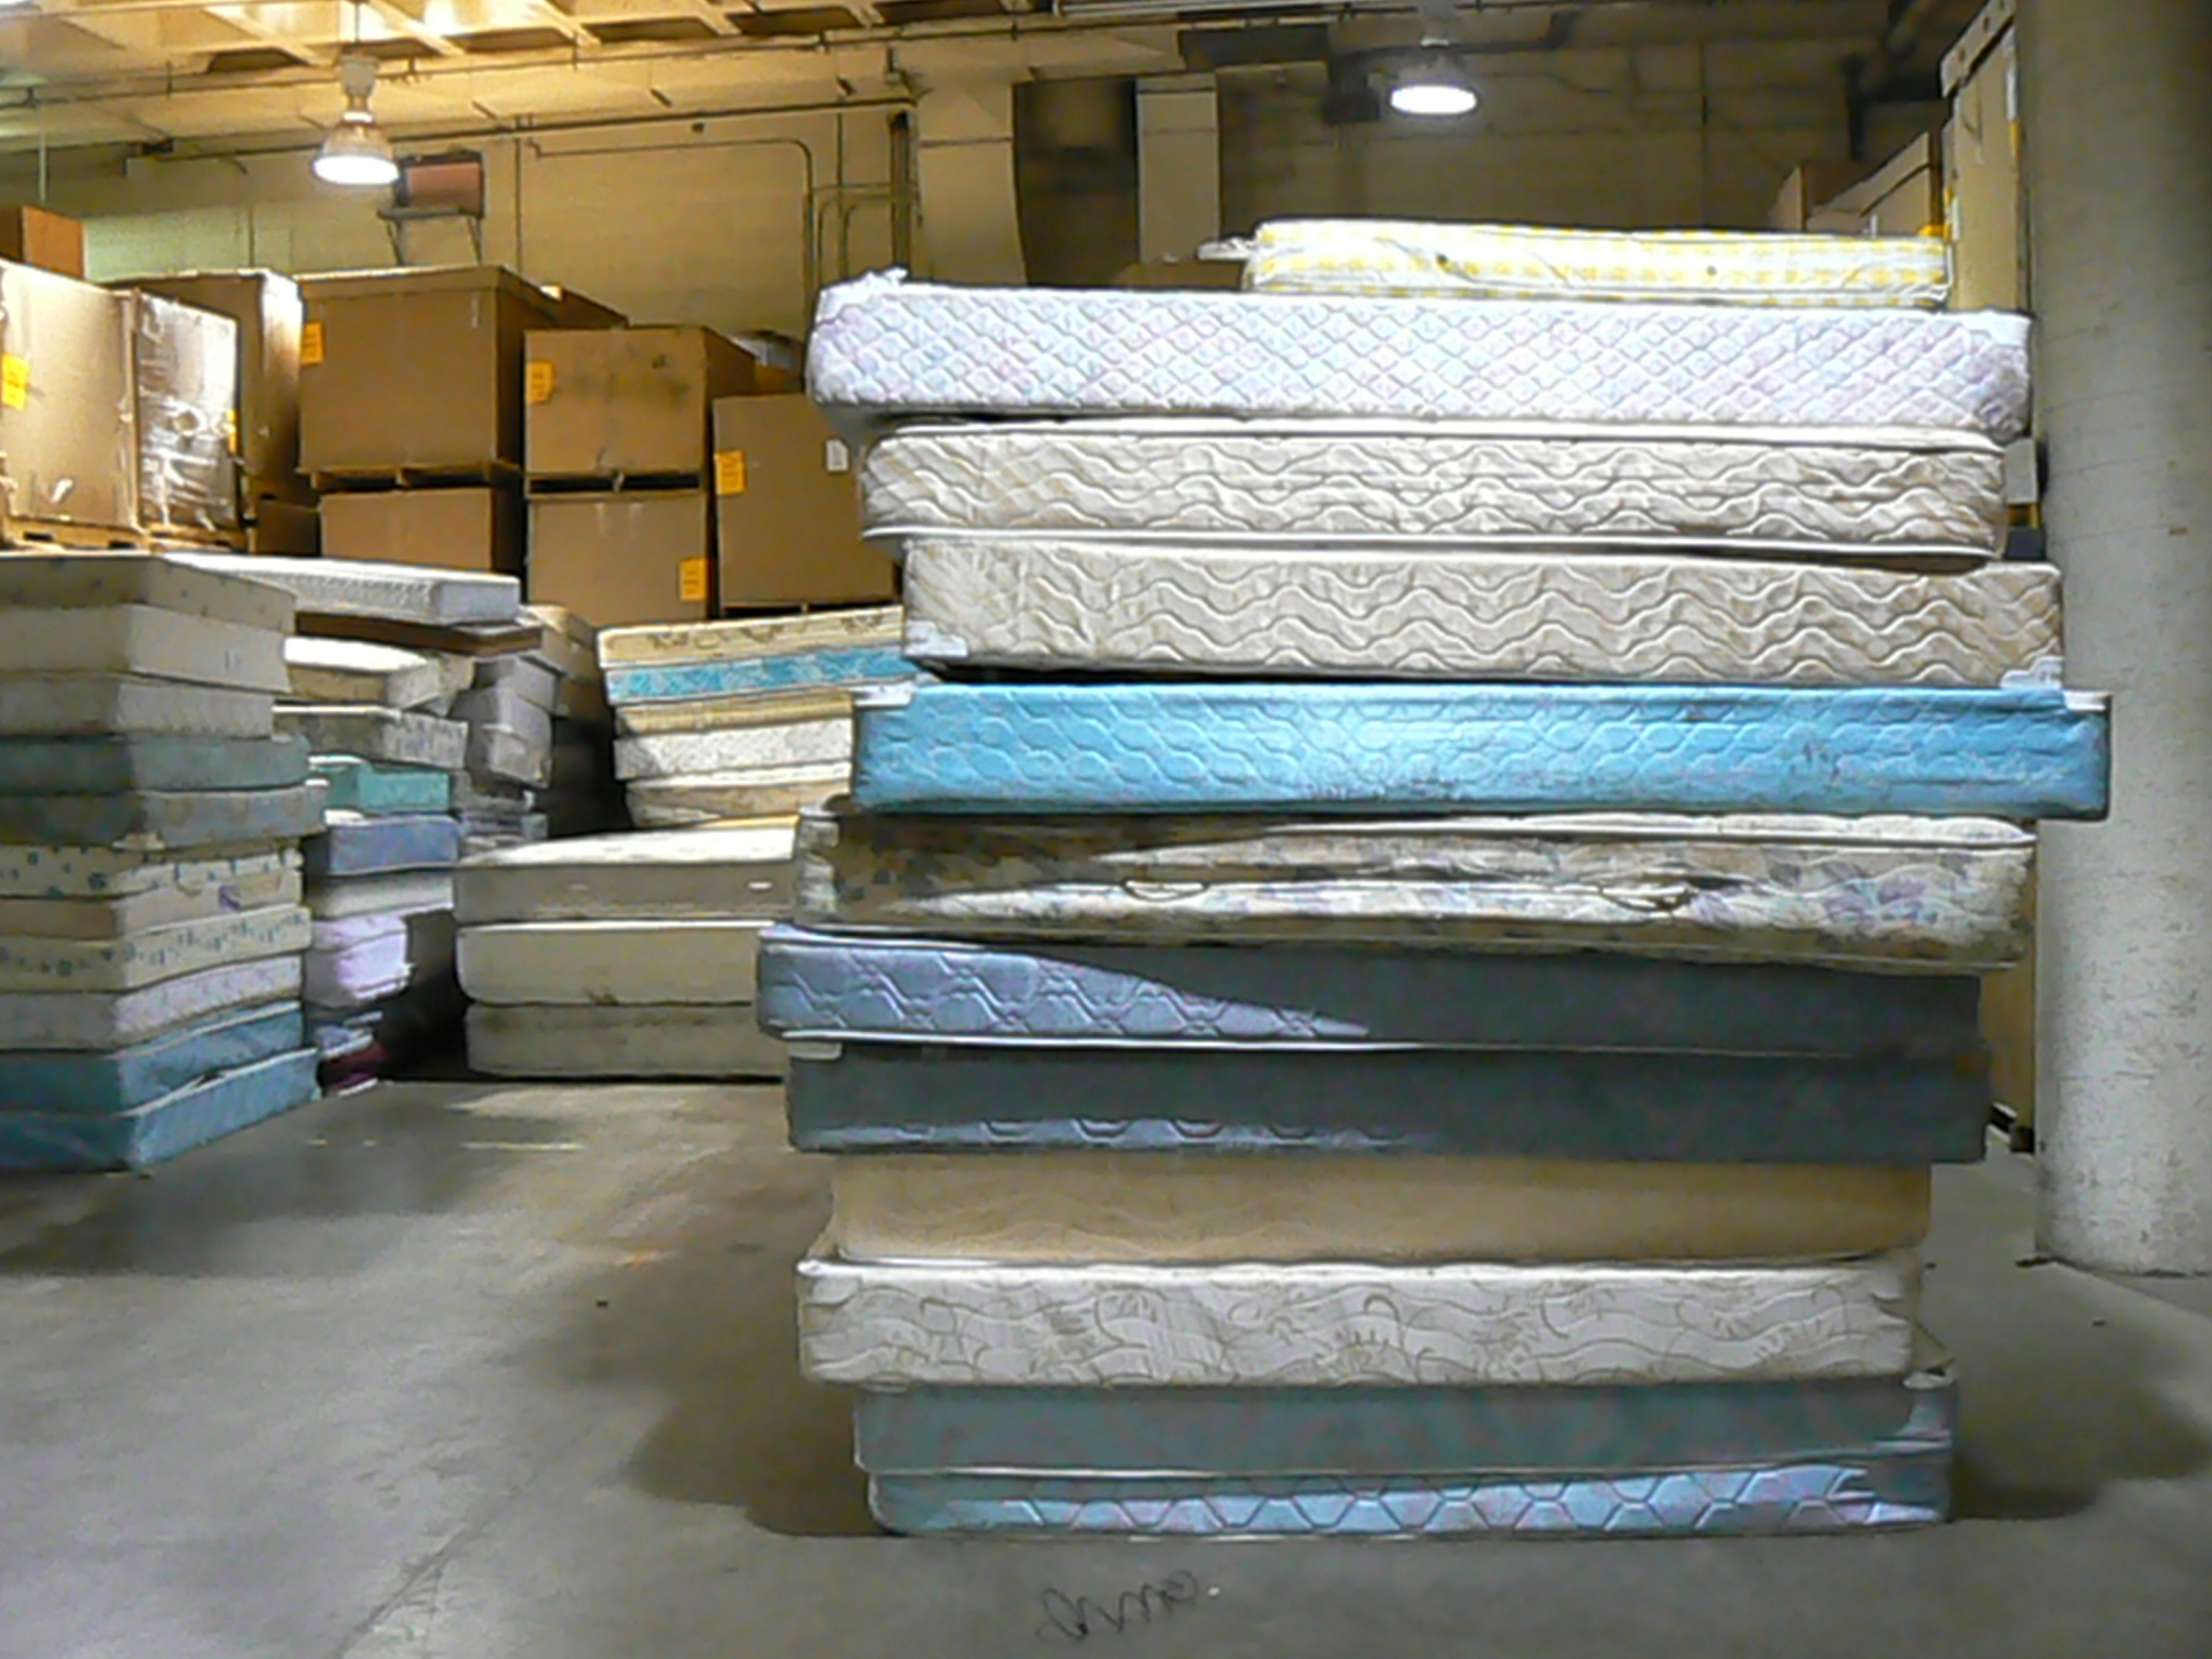 can traditional mattress be used on a base